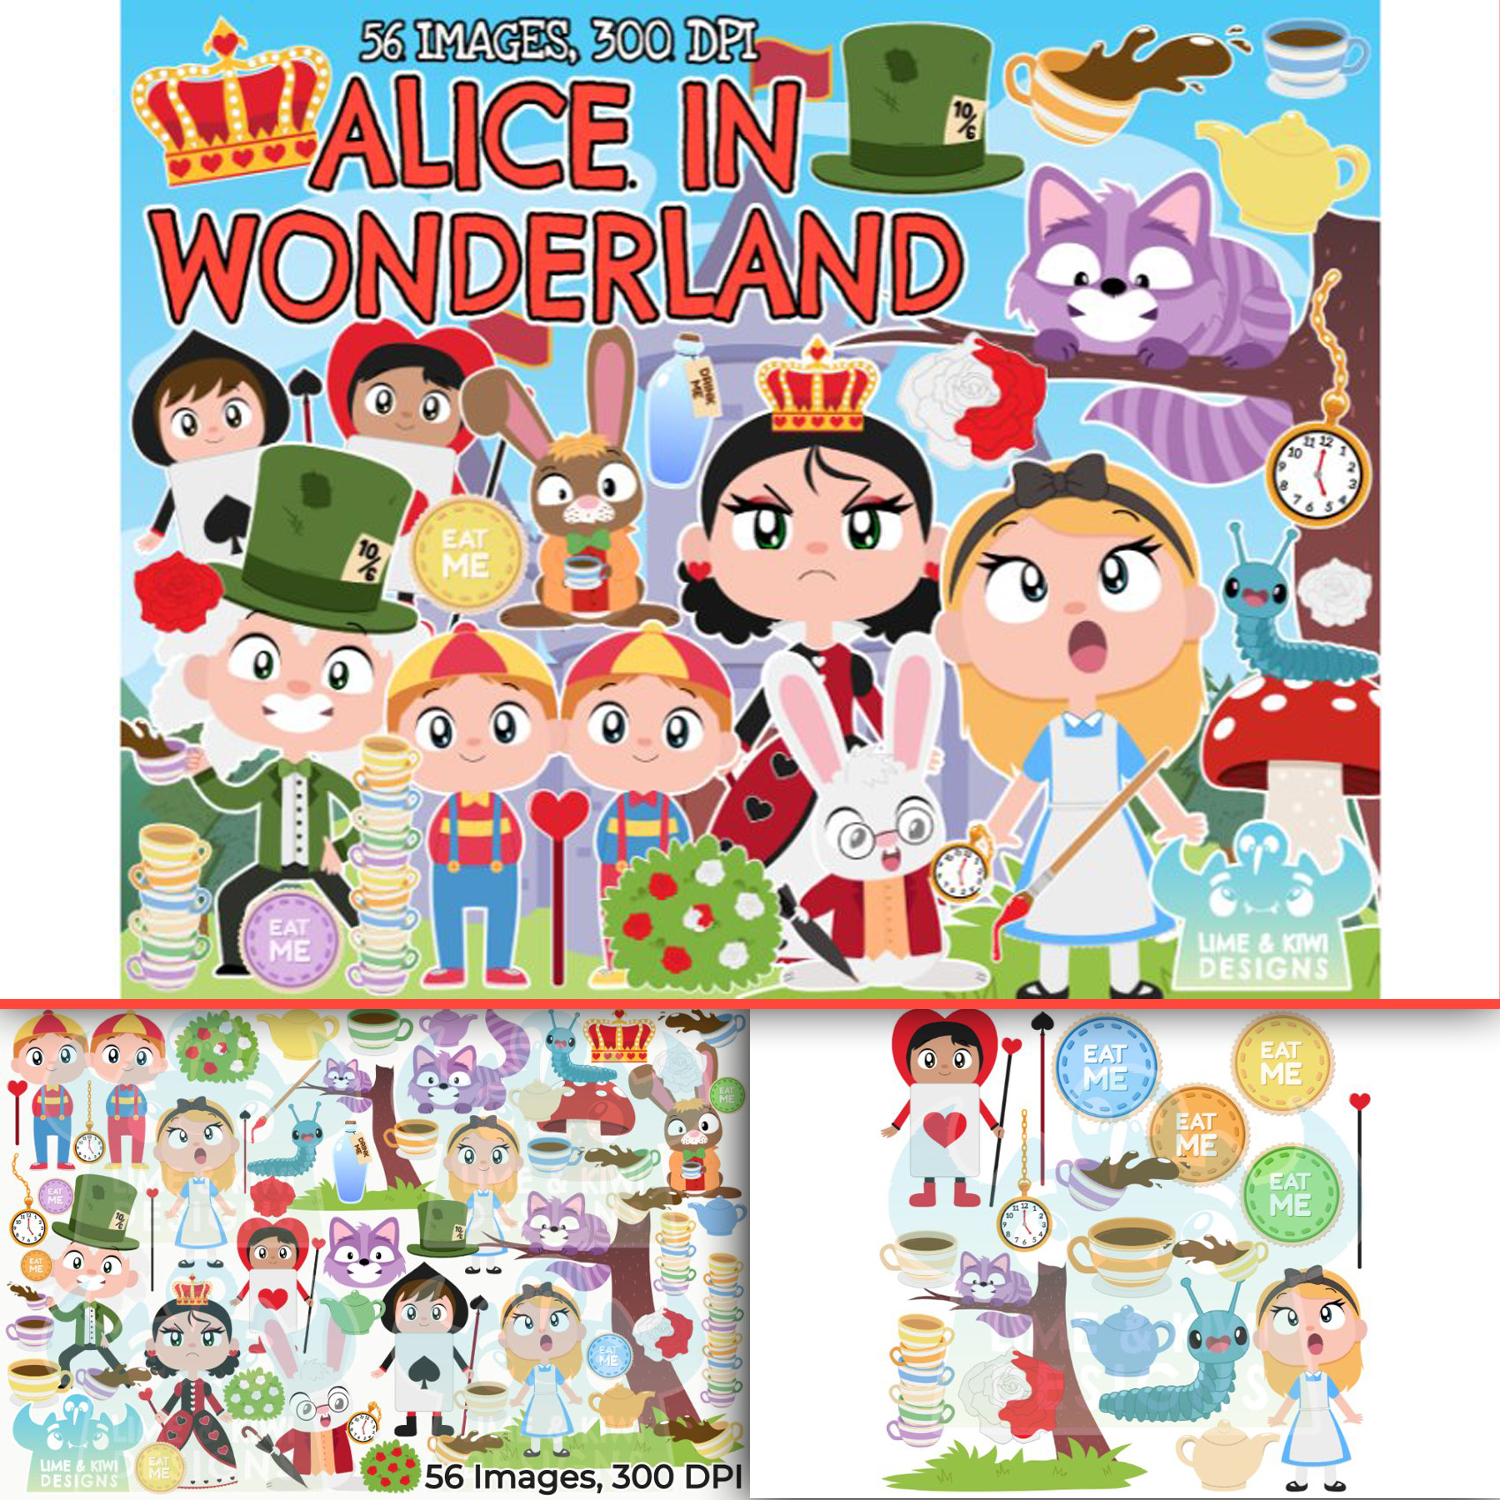 Prints of alice in wonderland clipart lime and kiwi designs.